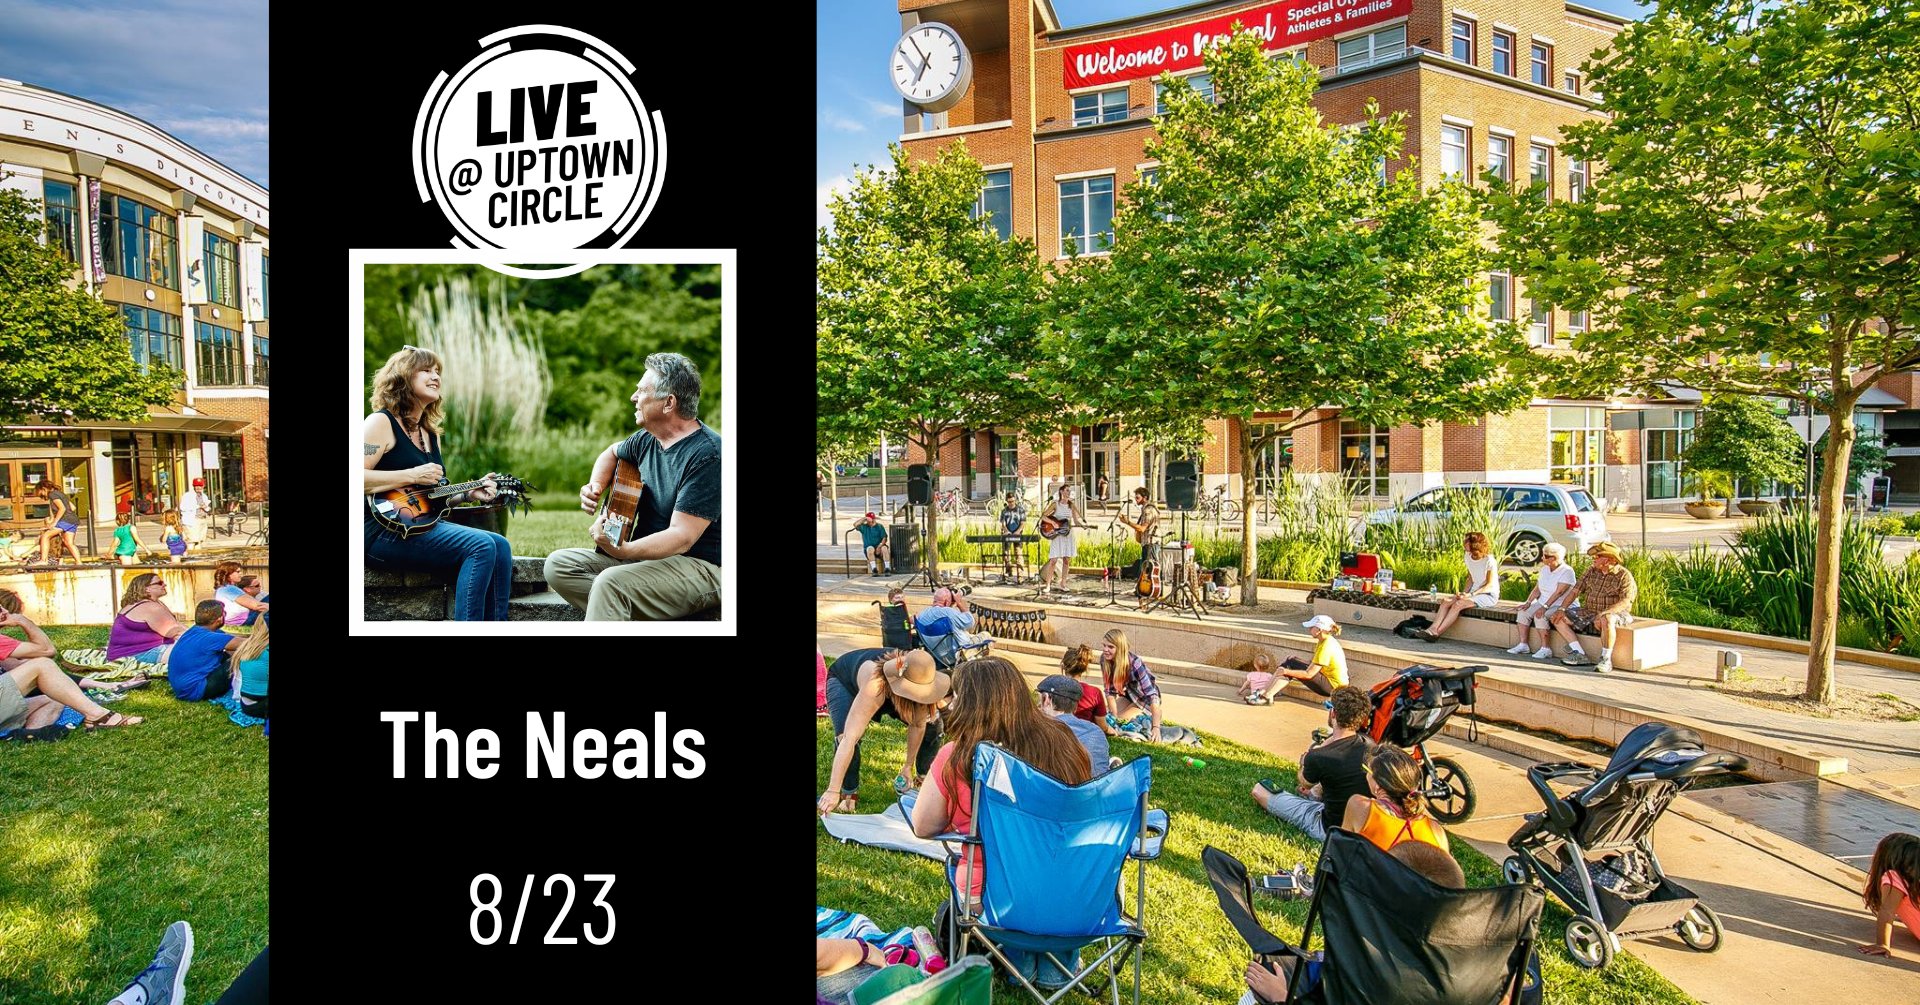 The Neals - LIVE @ Uptown Circle